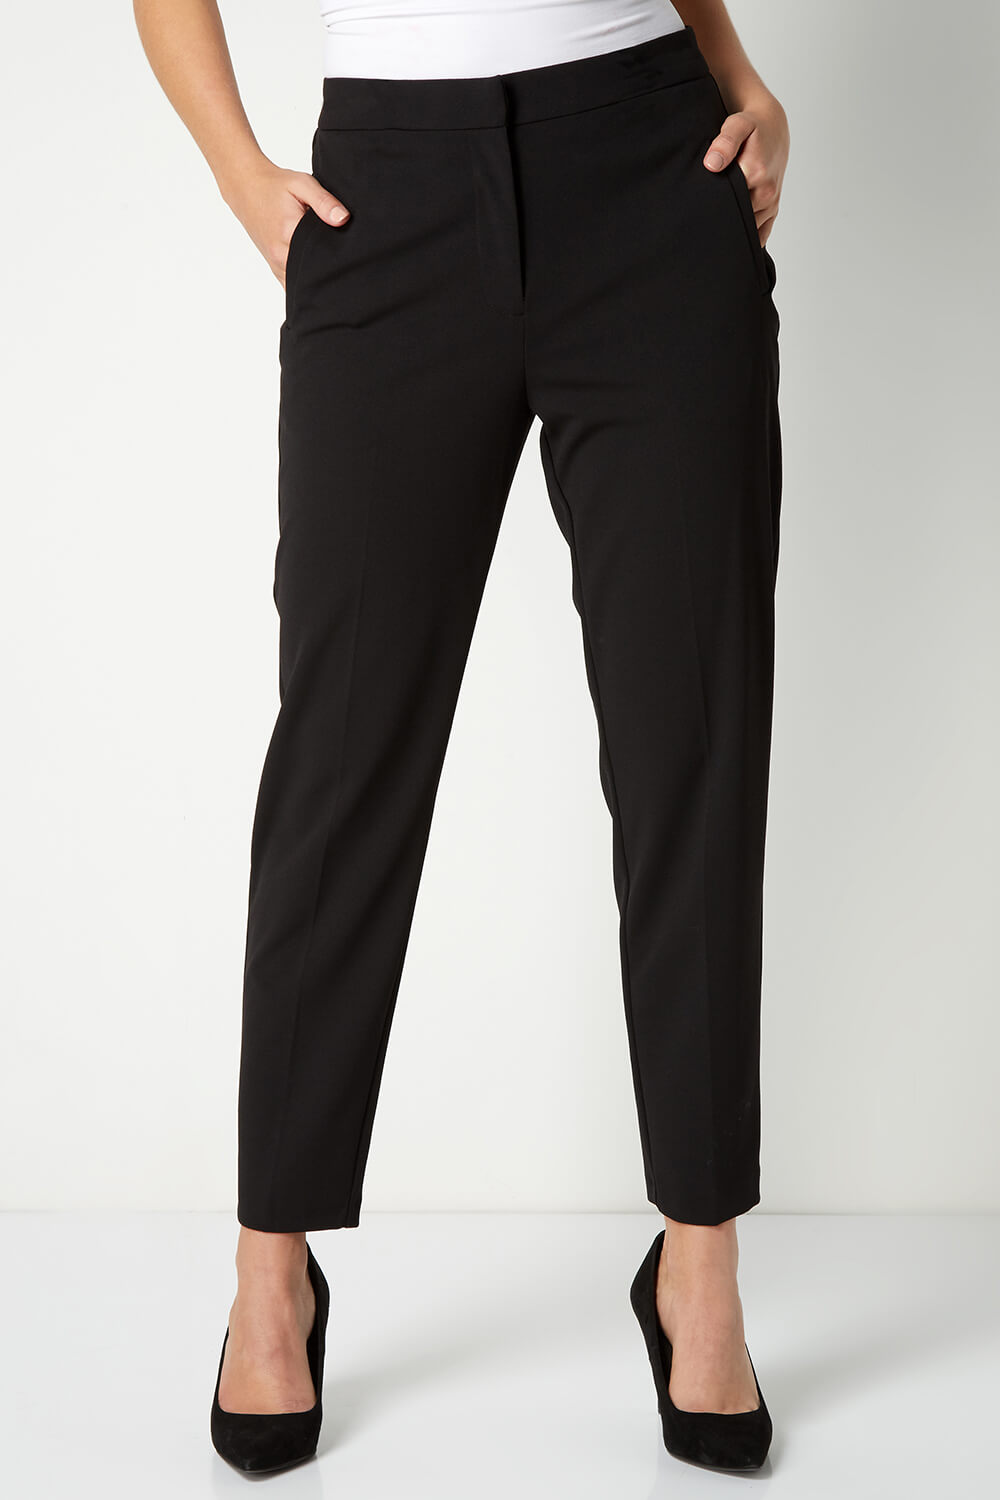 Burberry Black Wool Twill Stripe Detail Tailored Trousers, Brand Size 44  (Waist Size 29.5